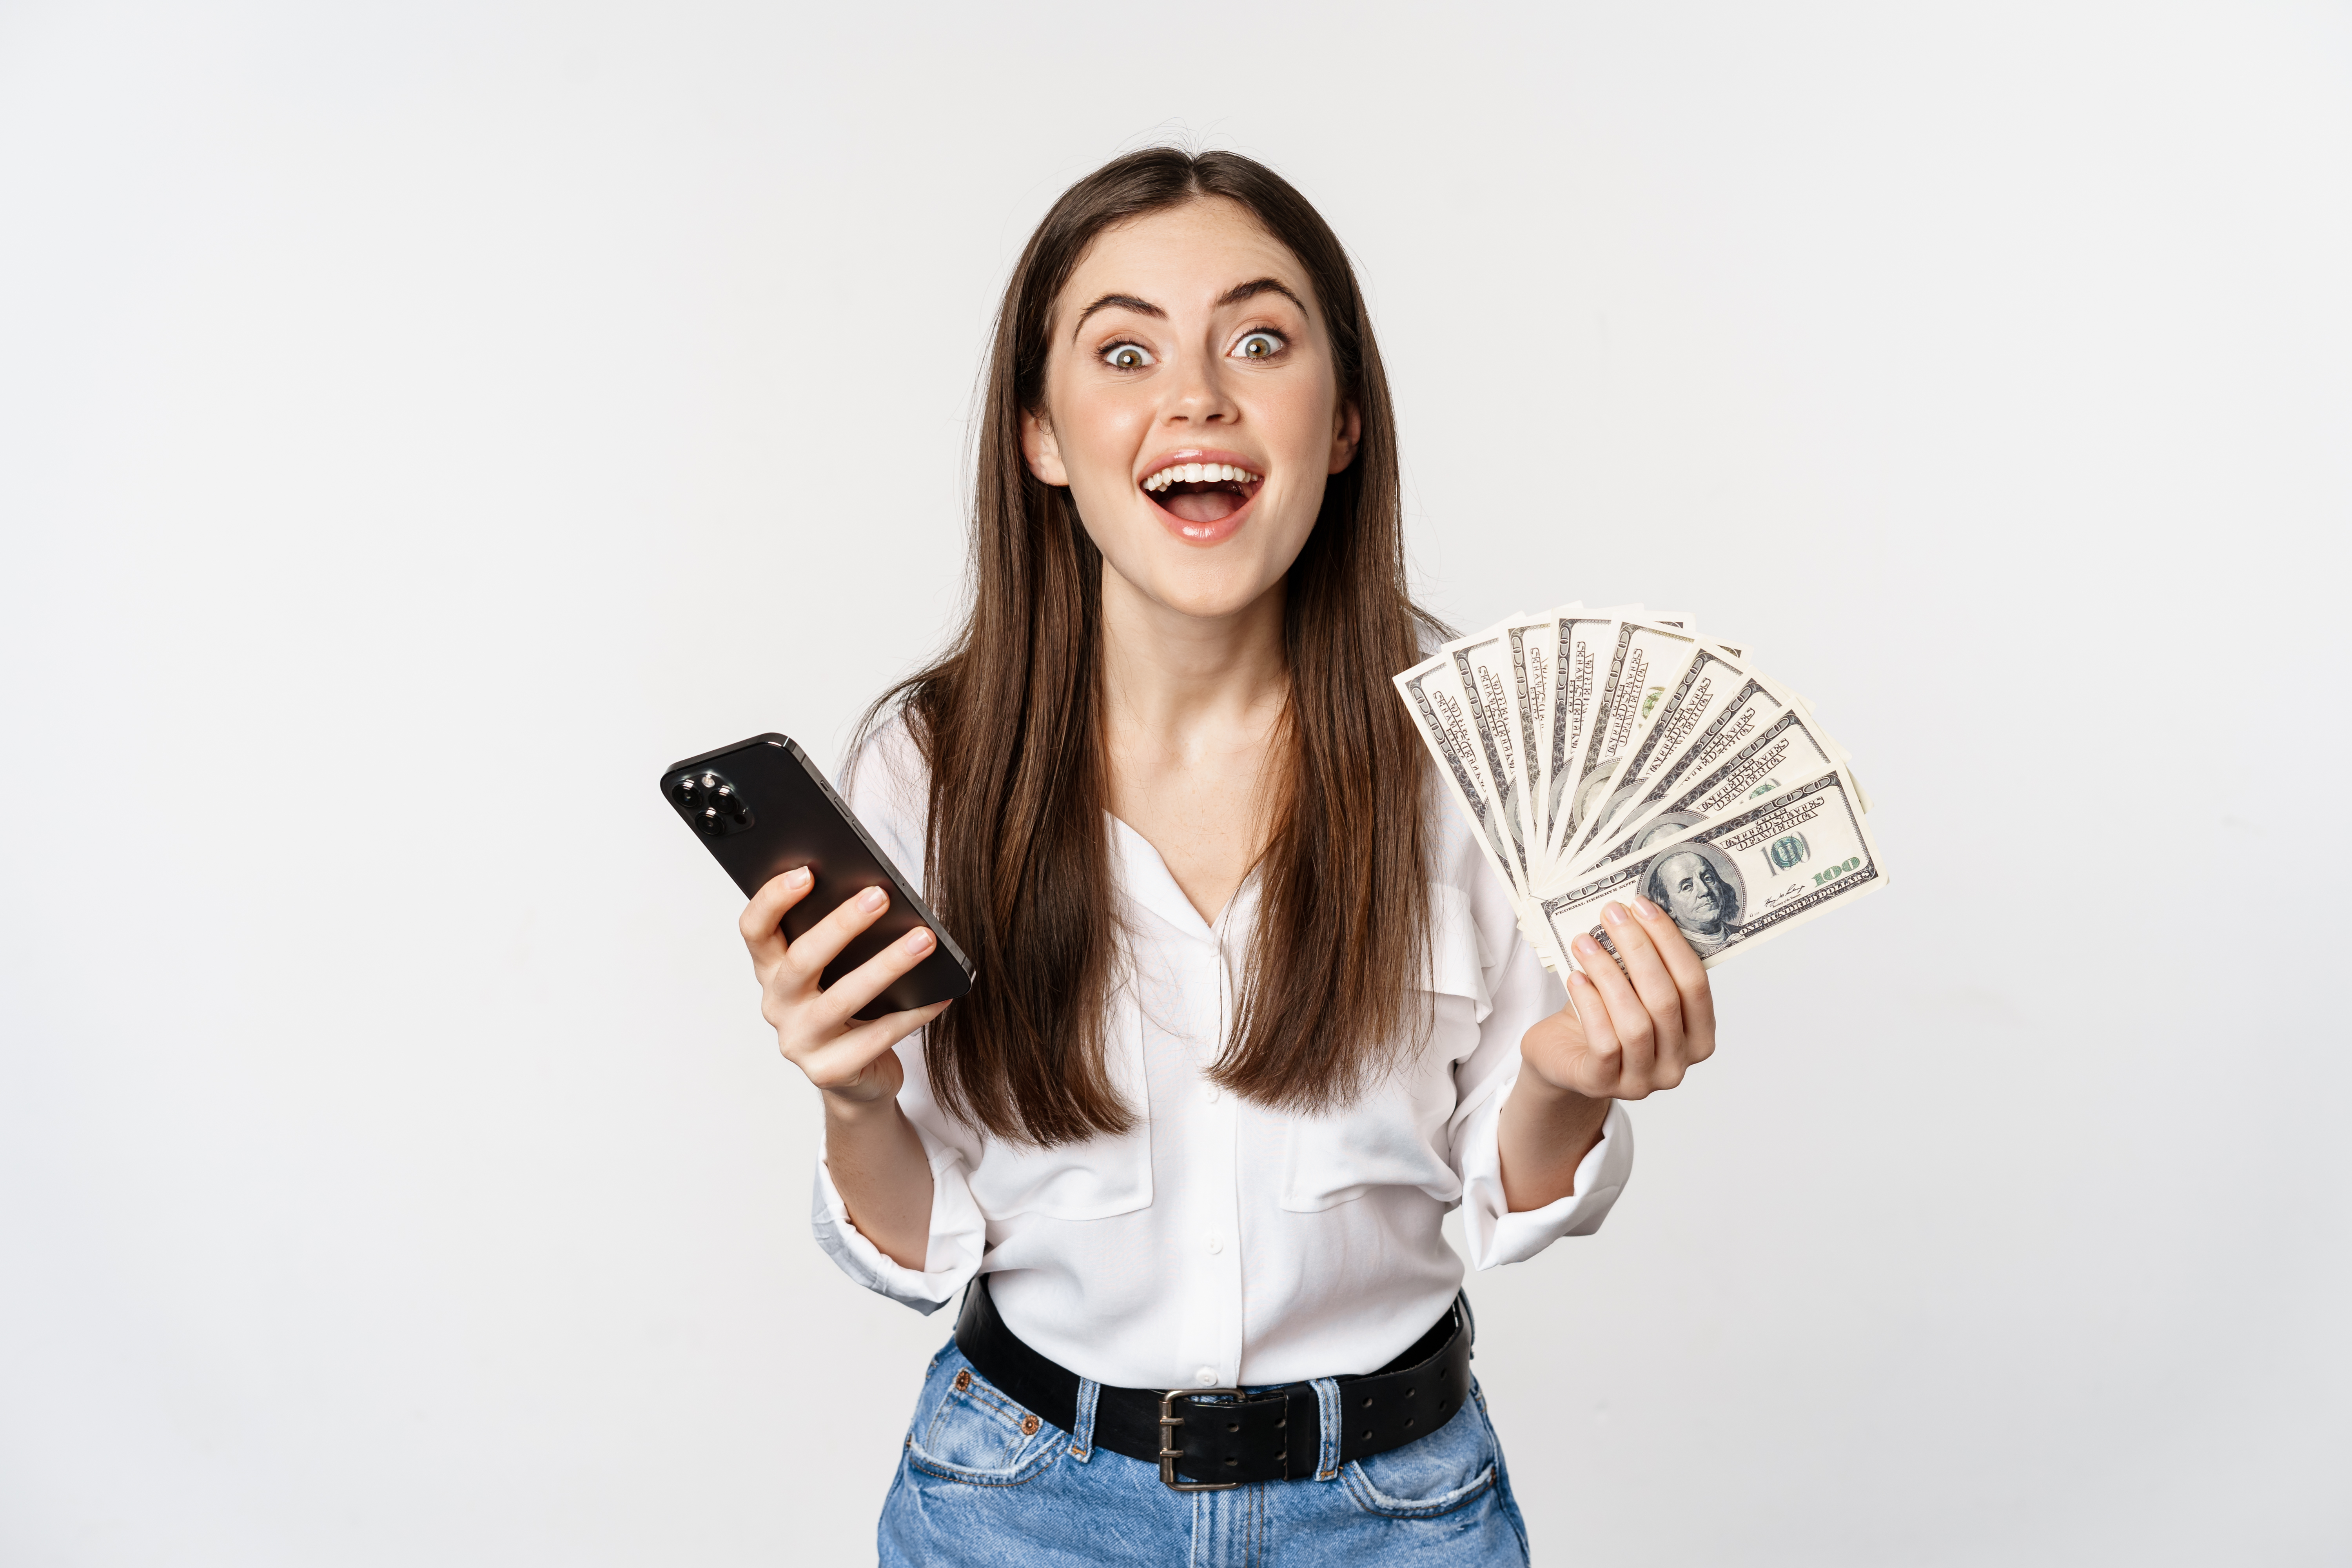 https://img.moneyduck.com/article_attachment/1669271725-online-microcredit-loans-banking-concept-happy-woman-holding-mobile-phone-money-smiling.jpg